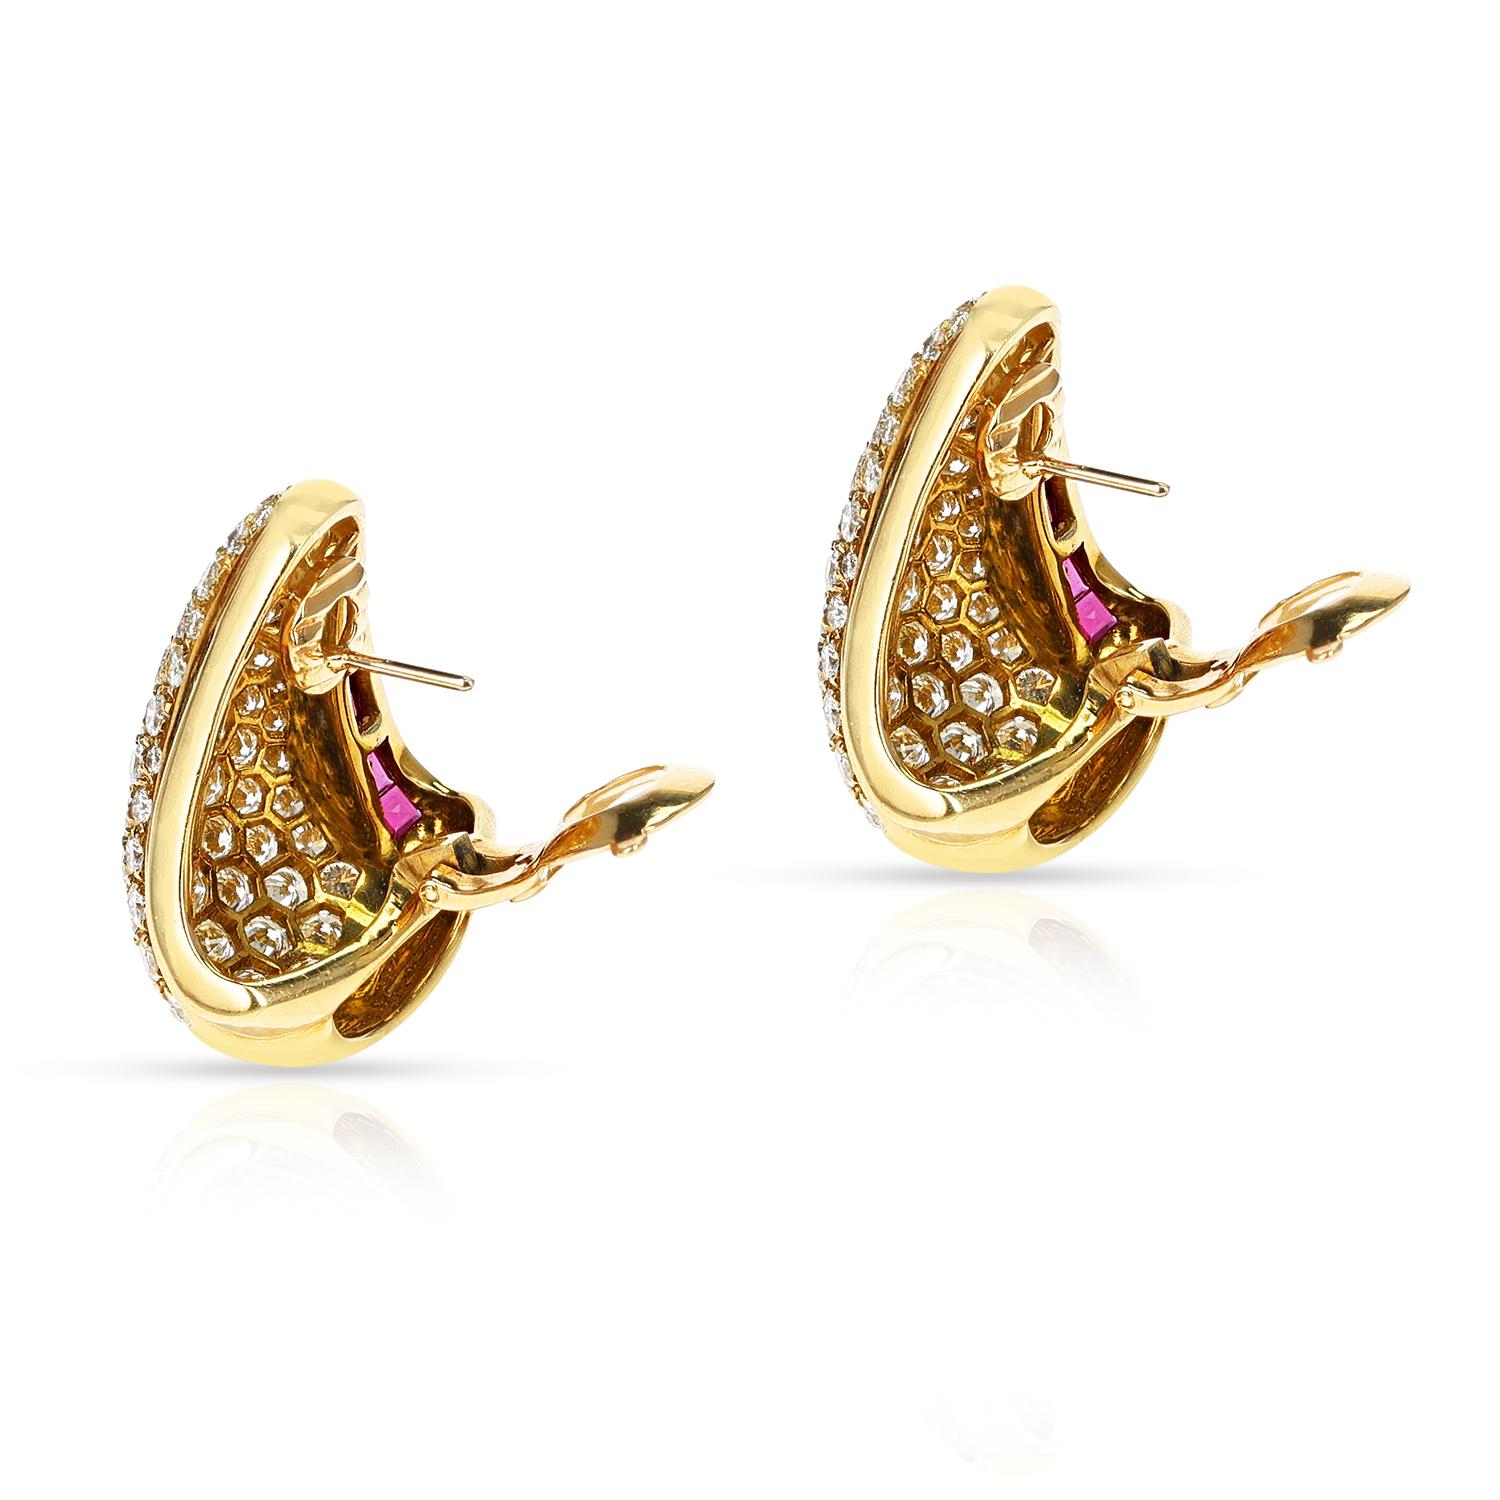 Van Cleef & Arpels Diamond and Ruby Cocktail Earrings, 18k In Excellent Condition For Sale In New York, NY